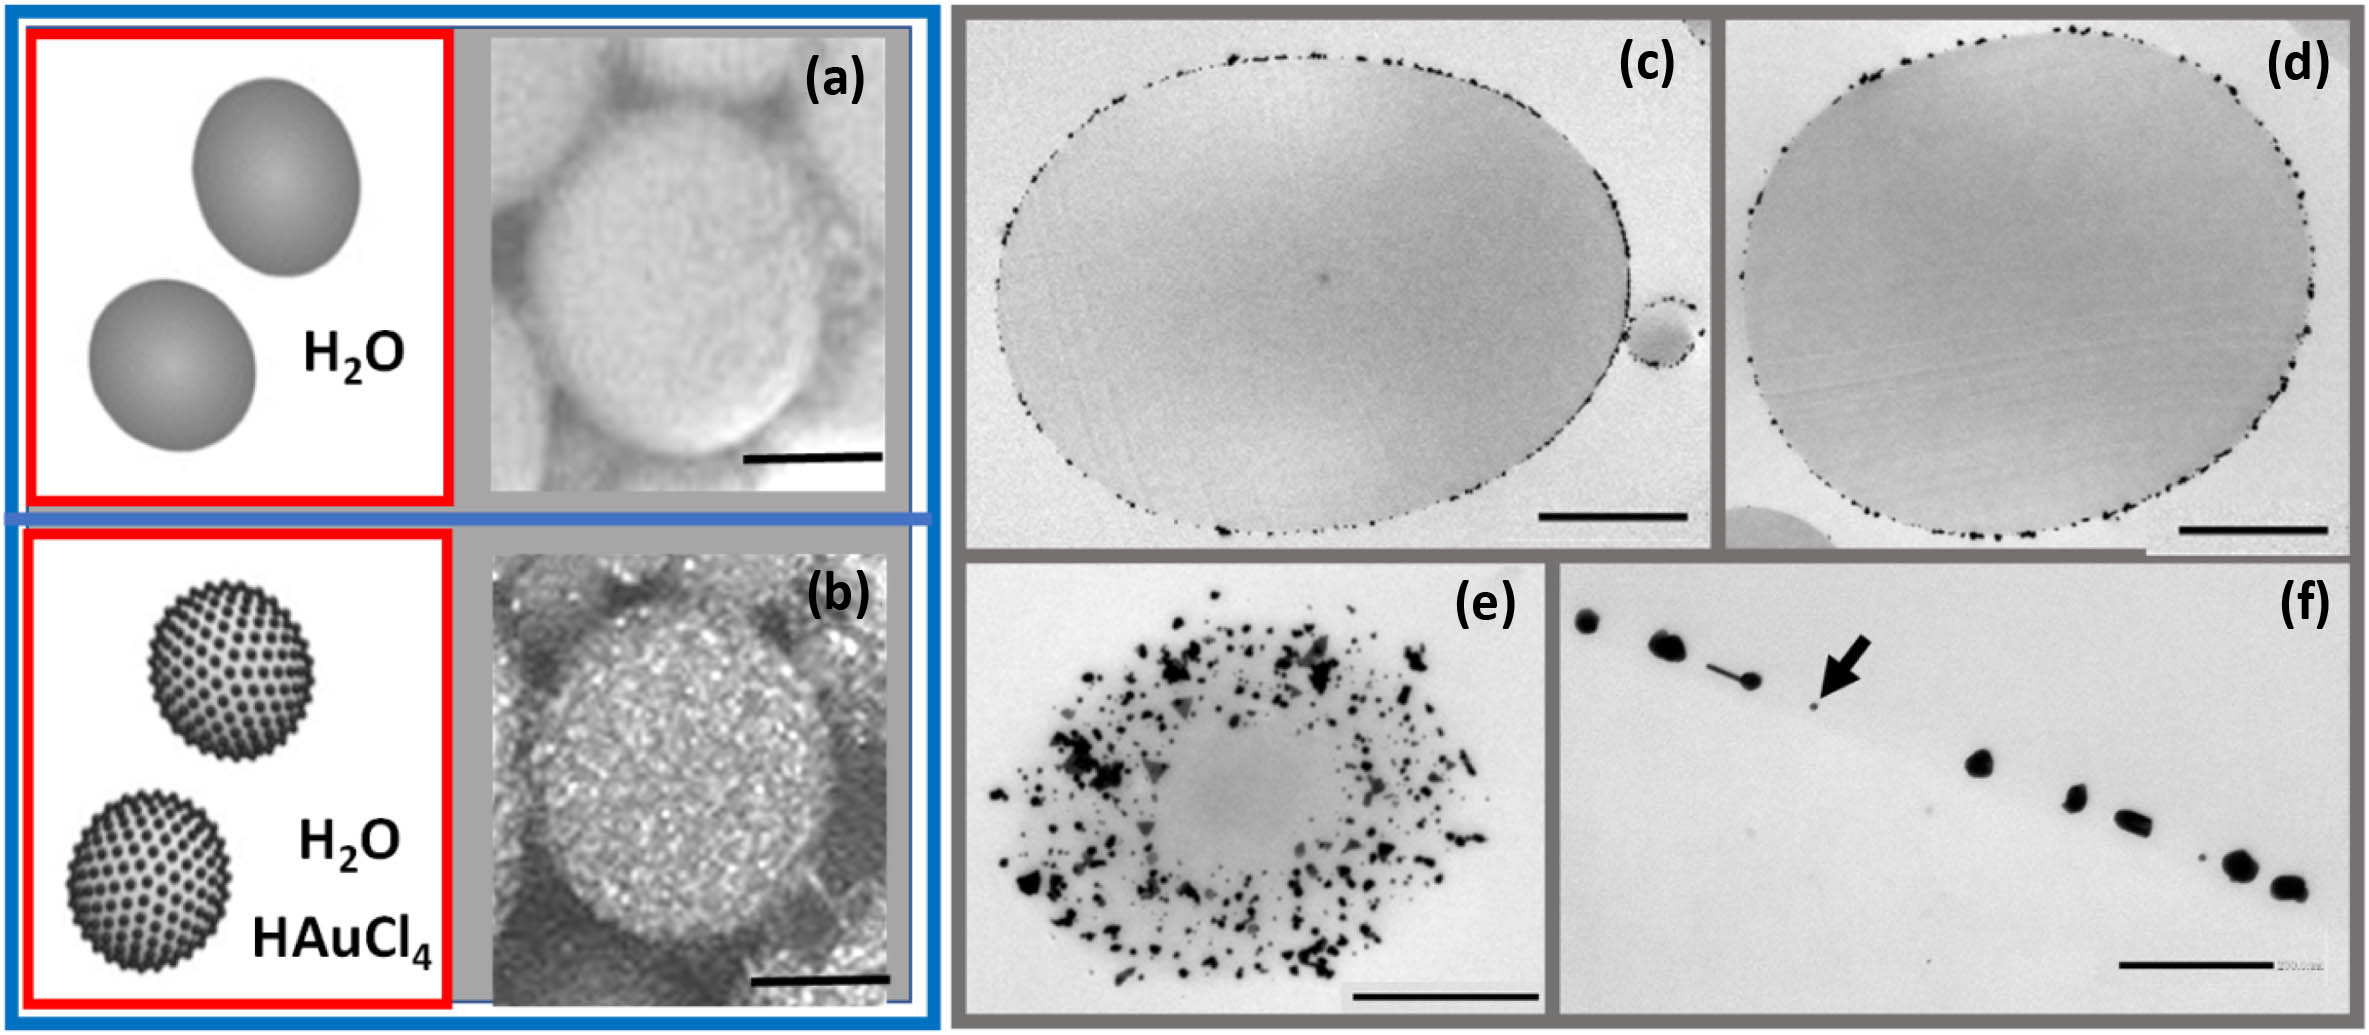 (a) and (b) Sketches and SEM images of NMPs and AuNMPs; scale bars 2 μm; (c) and (d) TEM images of thin central sections of different AuNMPs; scale bars 2 μm; (e) TEM image of a section near to the edge of an AuNMP; note the AuNPs’ distribution on the surface; scale bar 1 μm. (f) AuNPs located at the NMP surface, magnification of (c); scale bar 200 nm.